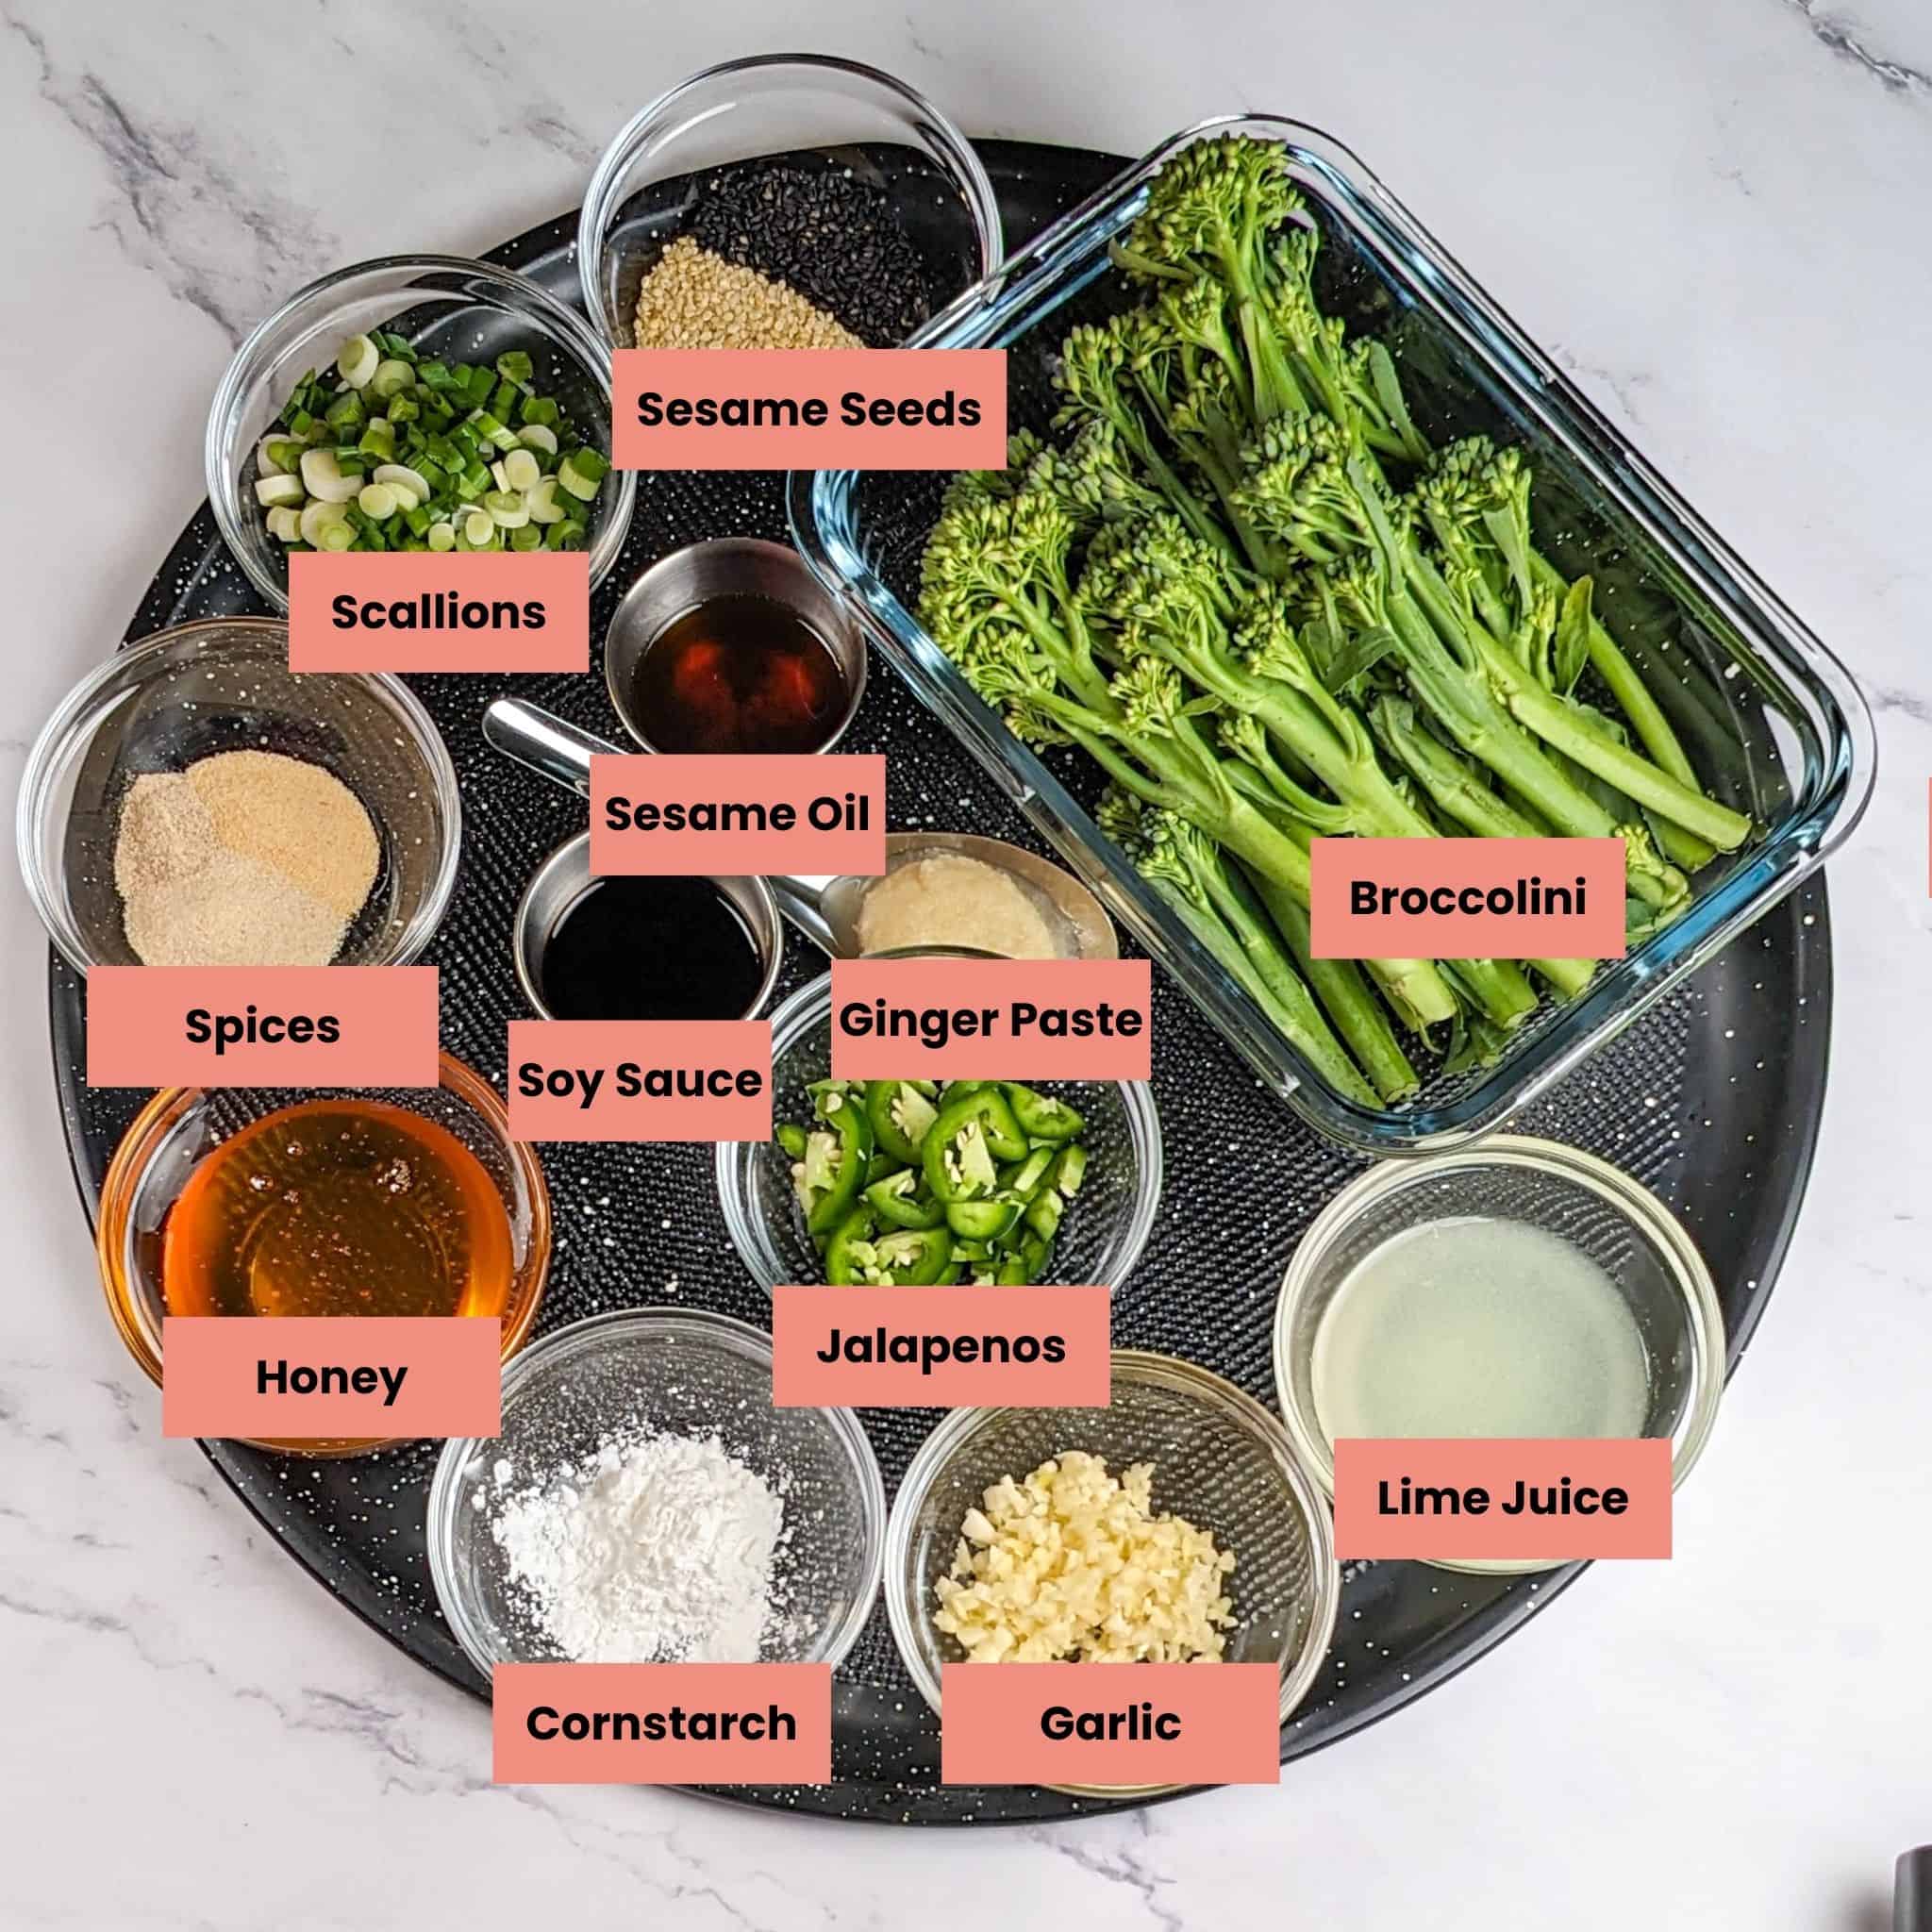 The Spicy Honey Jalapeno Lime Chicken with Broccolini recipe ingredients in containers on a large pizza pan.